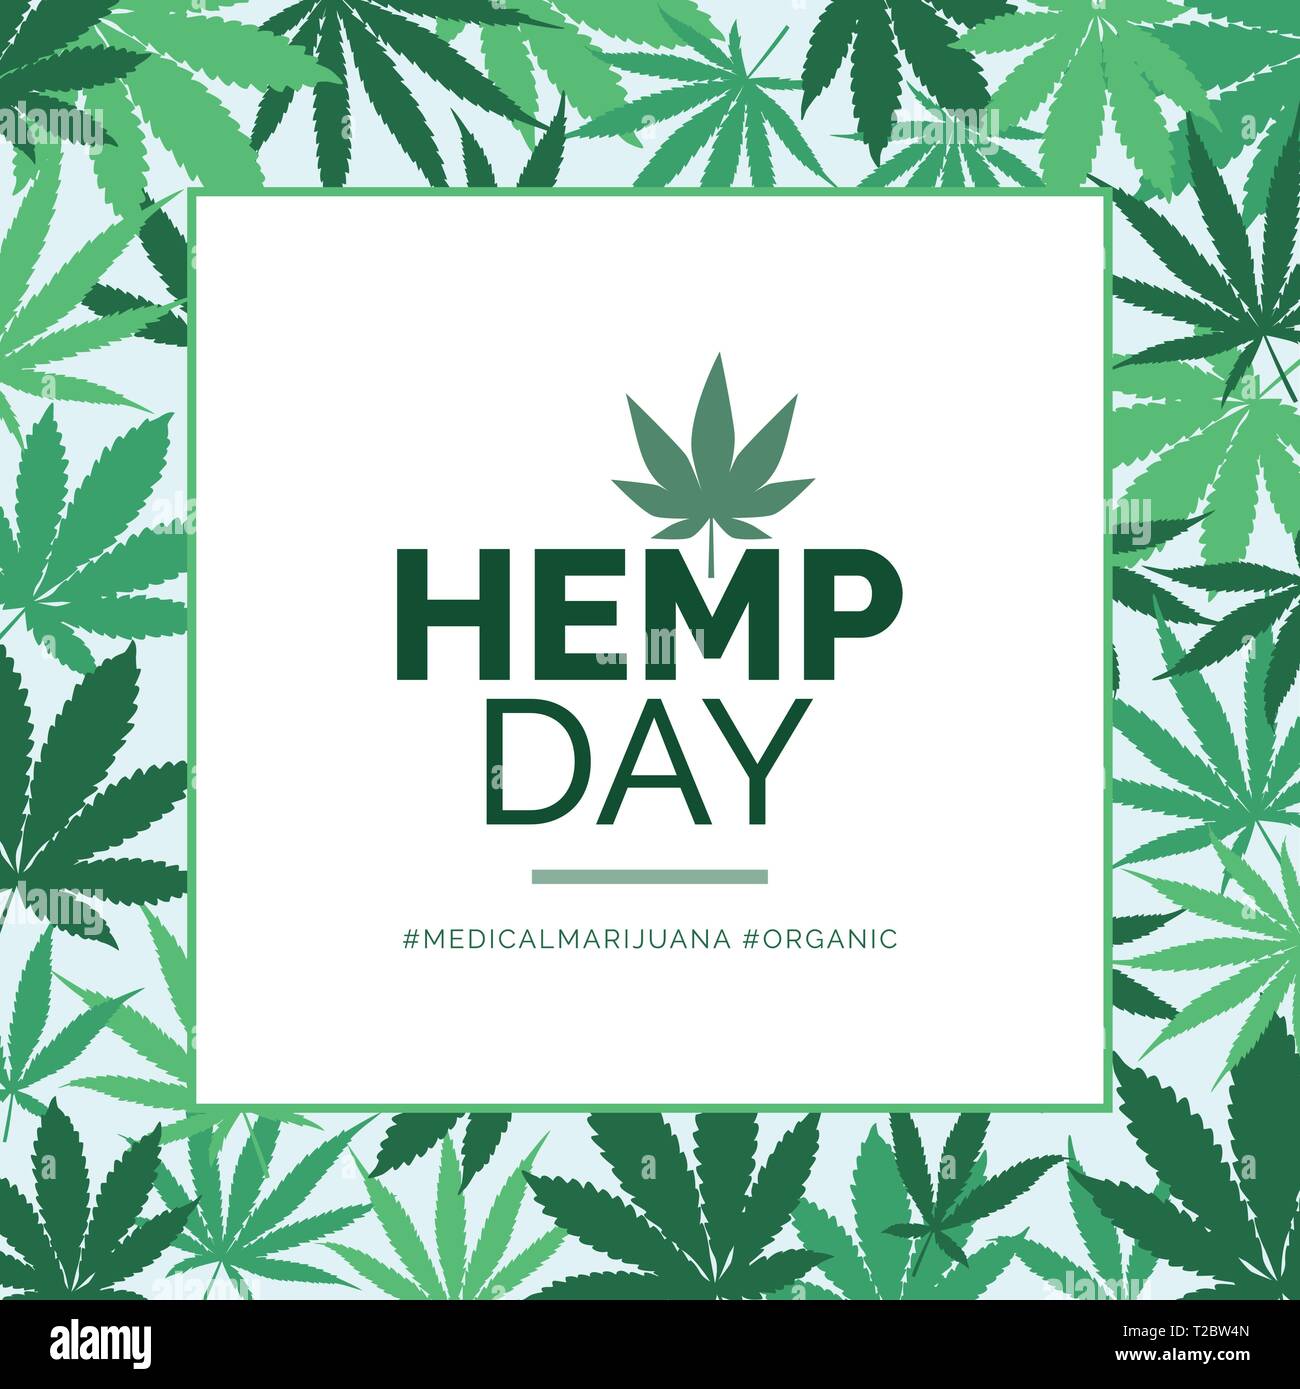 Hemp day and medical marijuana advertisement with green leaves frame Stock Vector